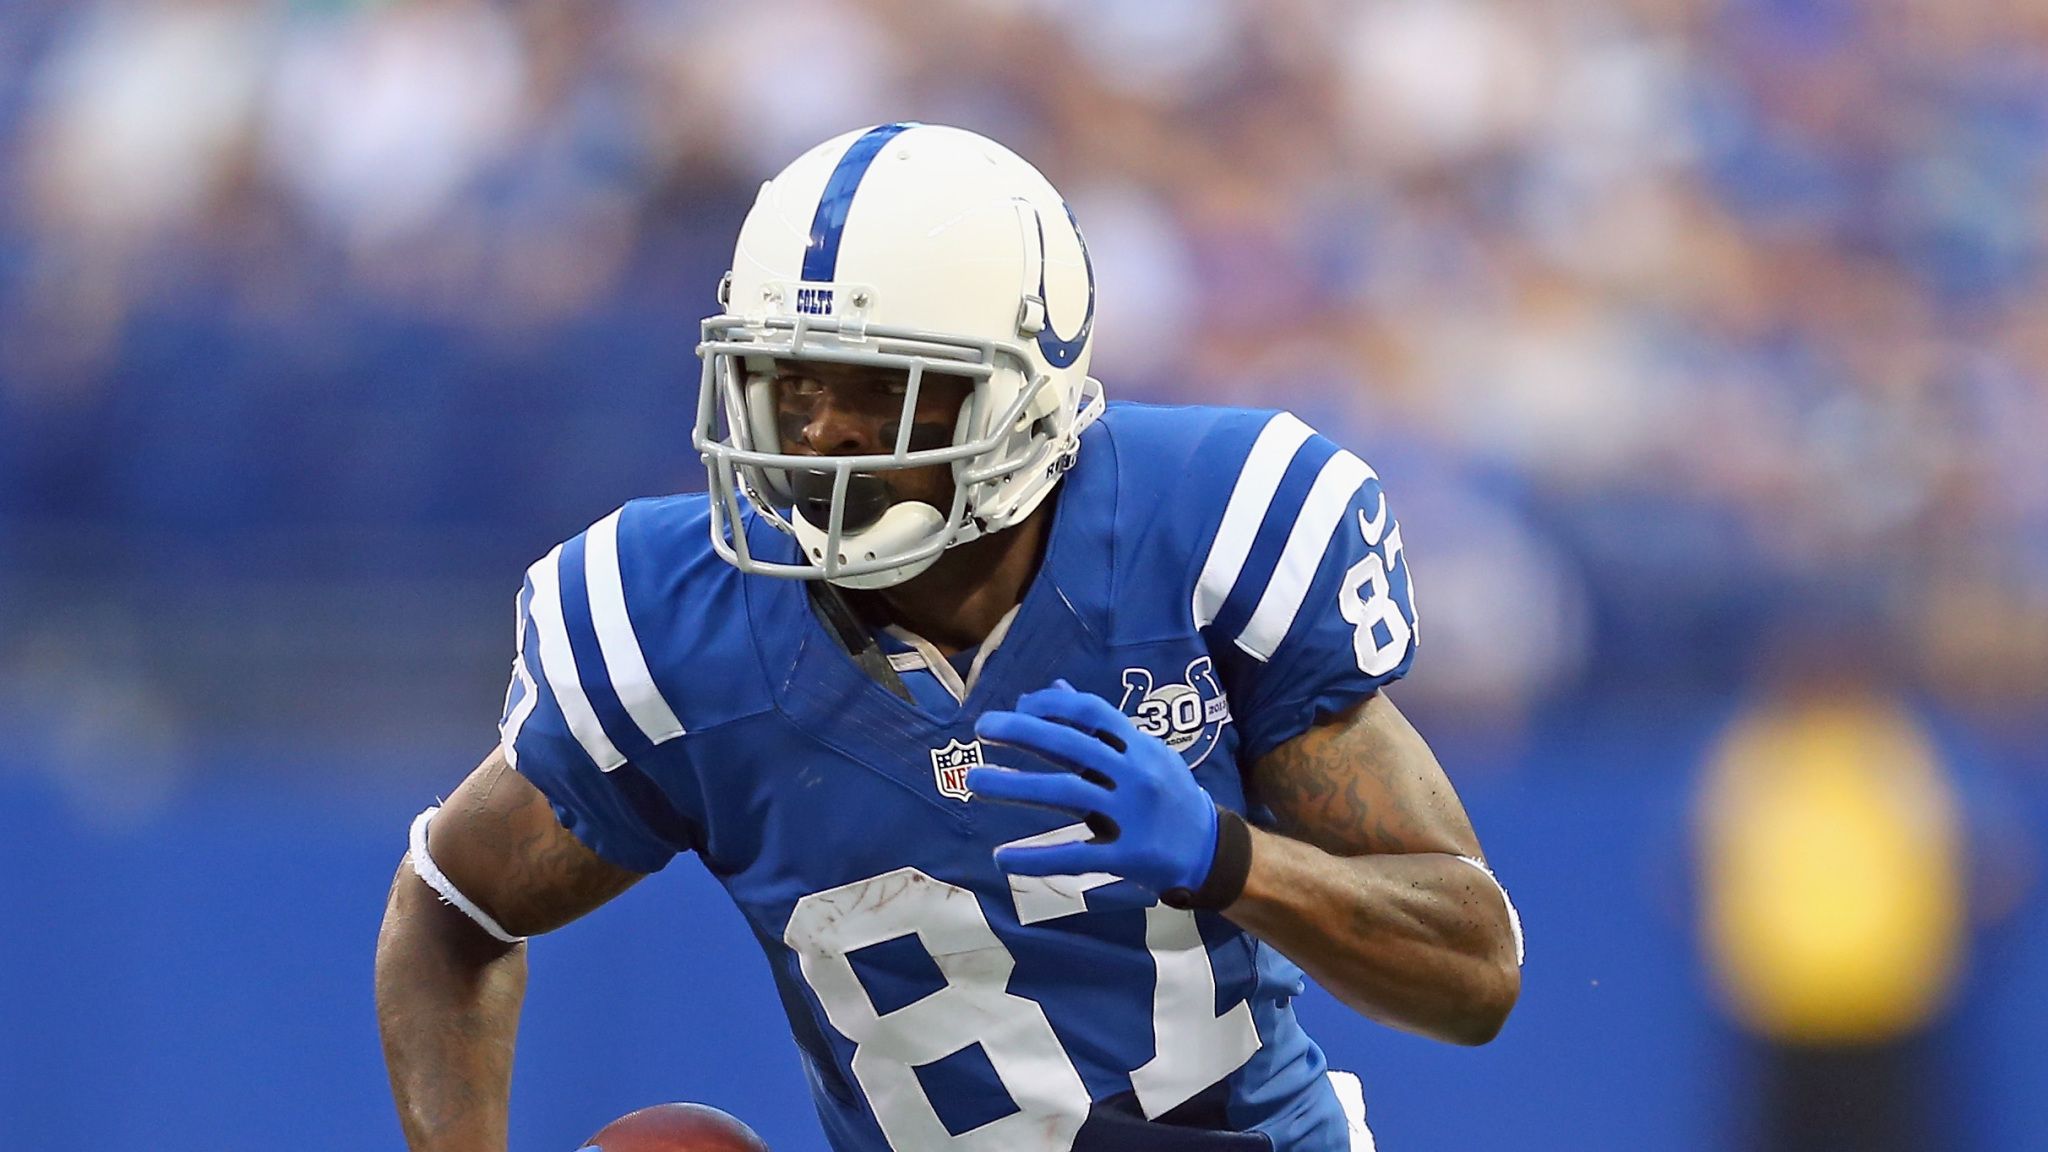 NFL: Indianapolis Colts lose top receiver Reggie Wayne to serious knee injury